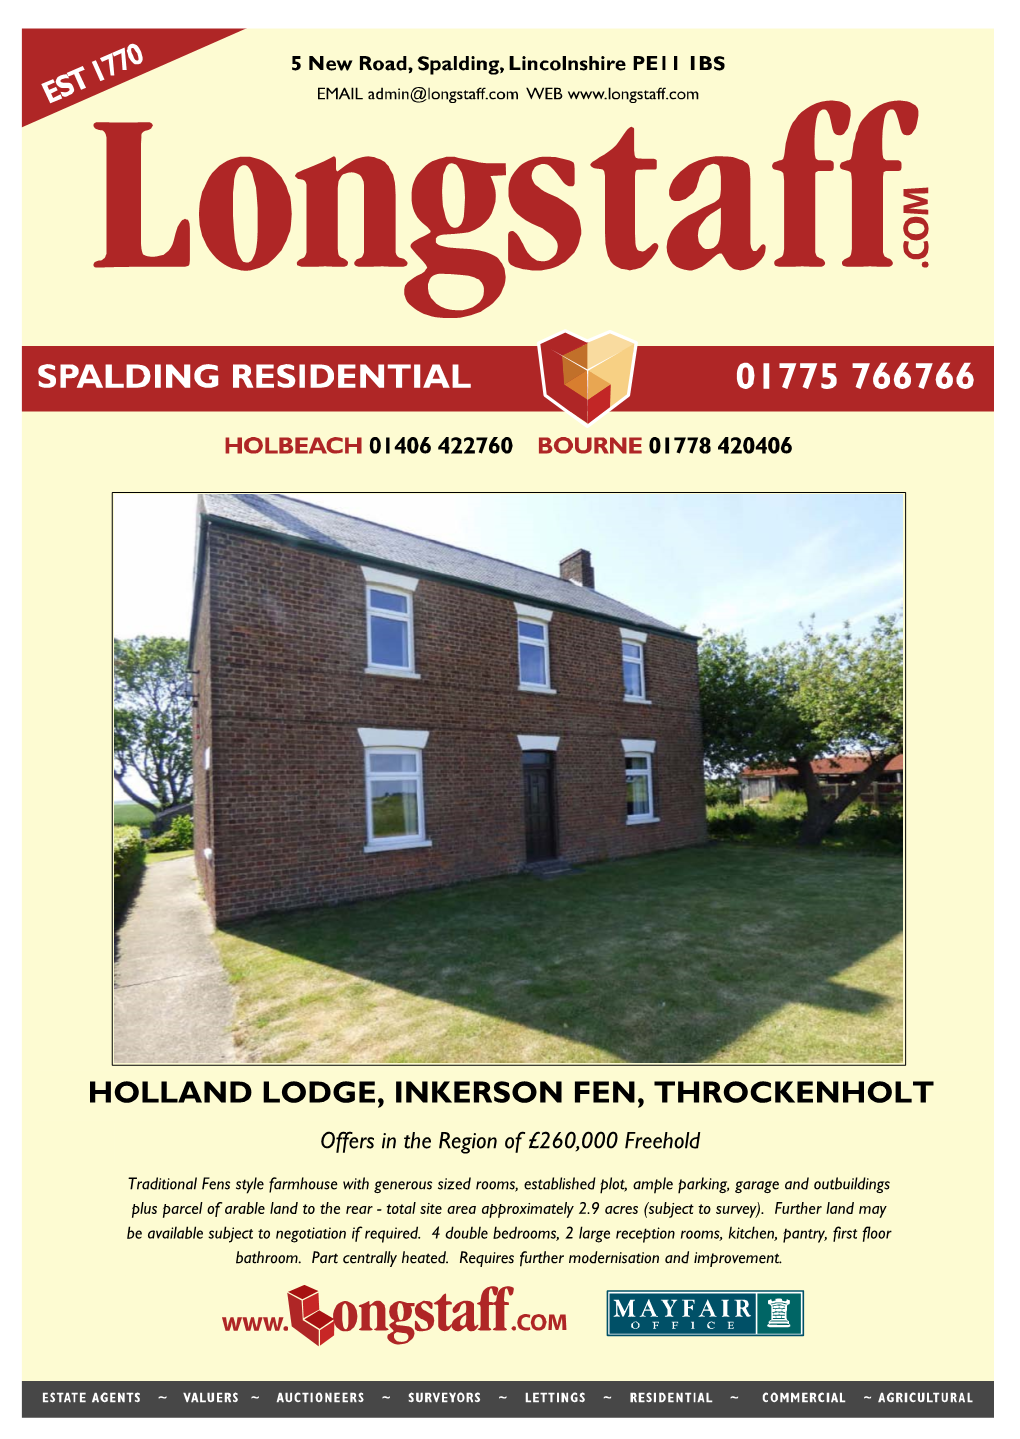 HOLLAND LODGE, INKERSON FEN, THROCKENHOLT Offers in the Region of £260,000 Freehold